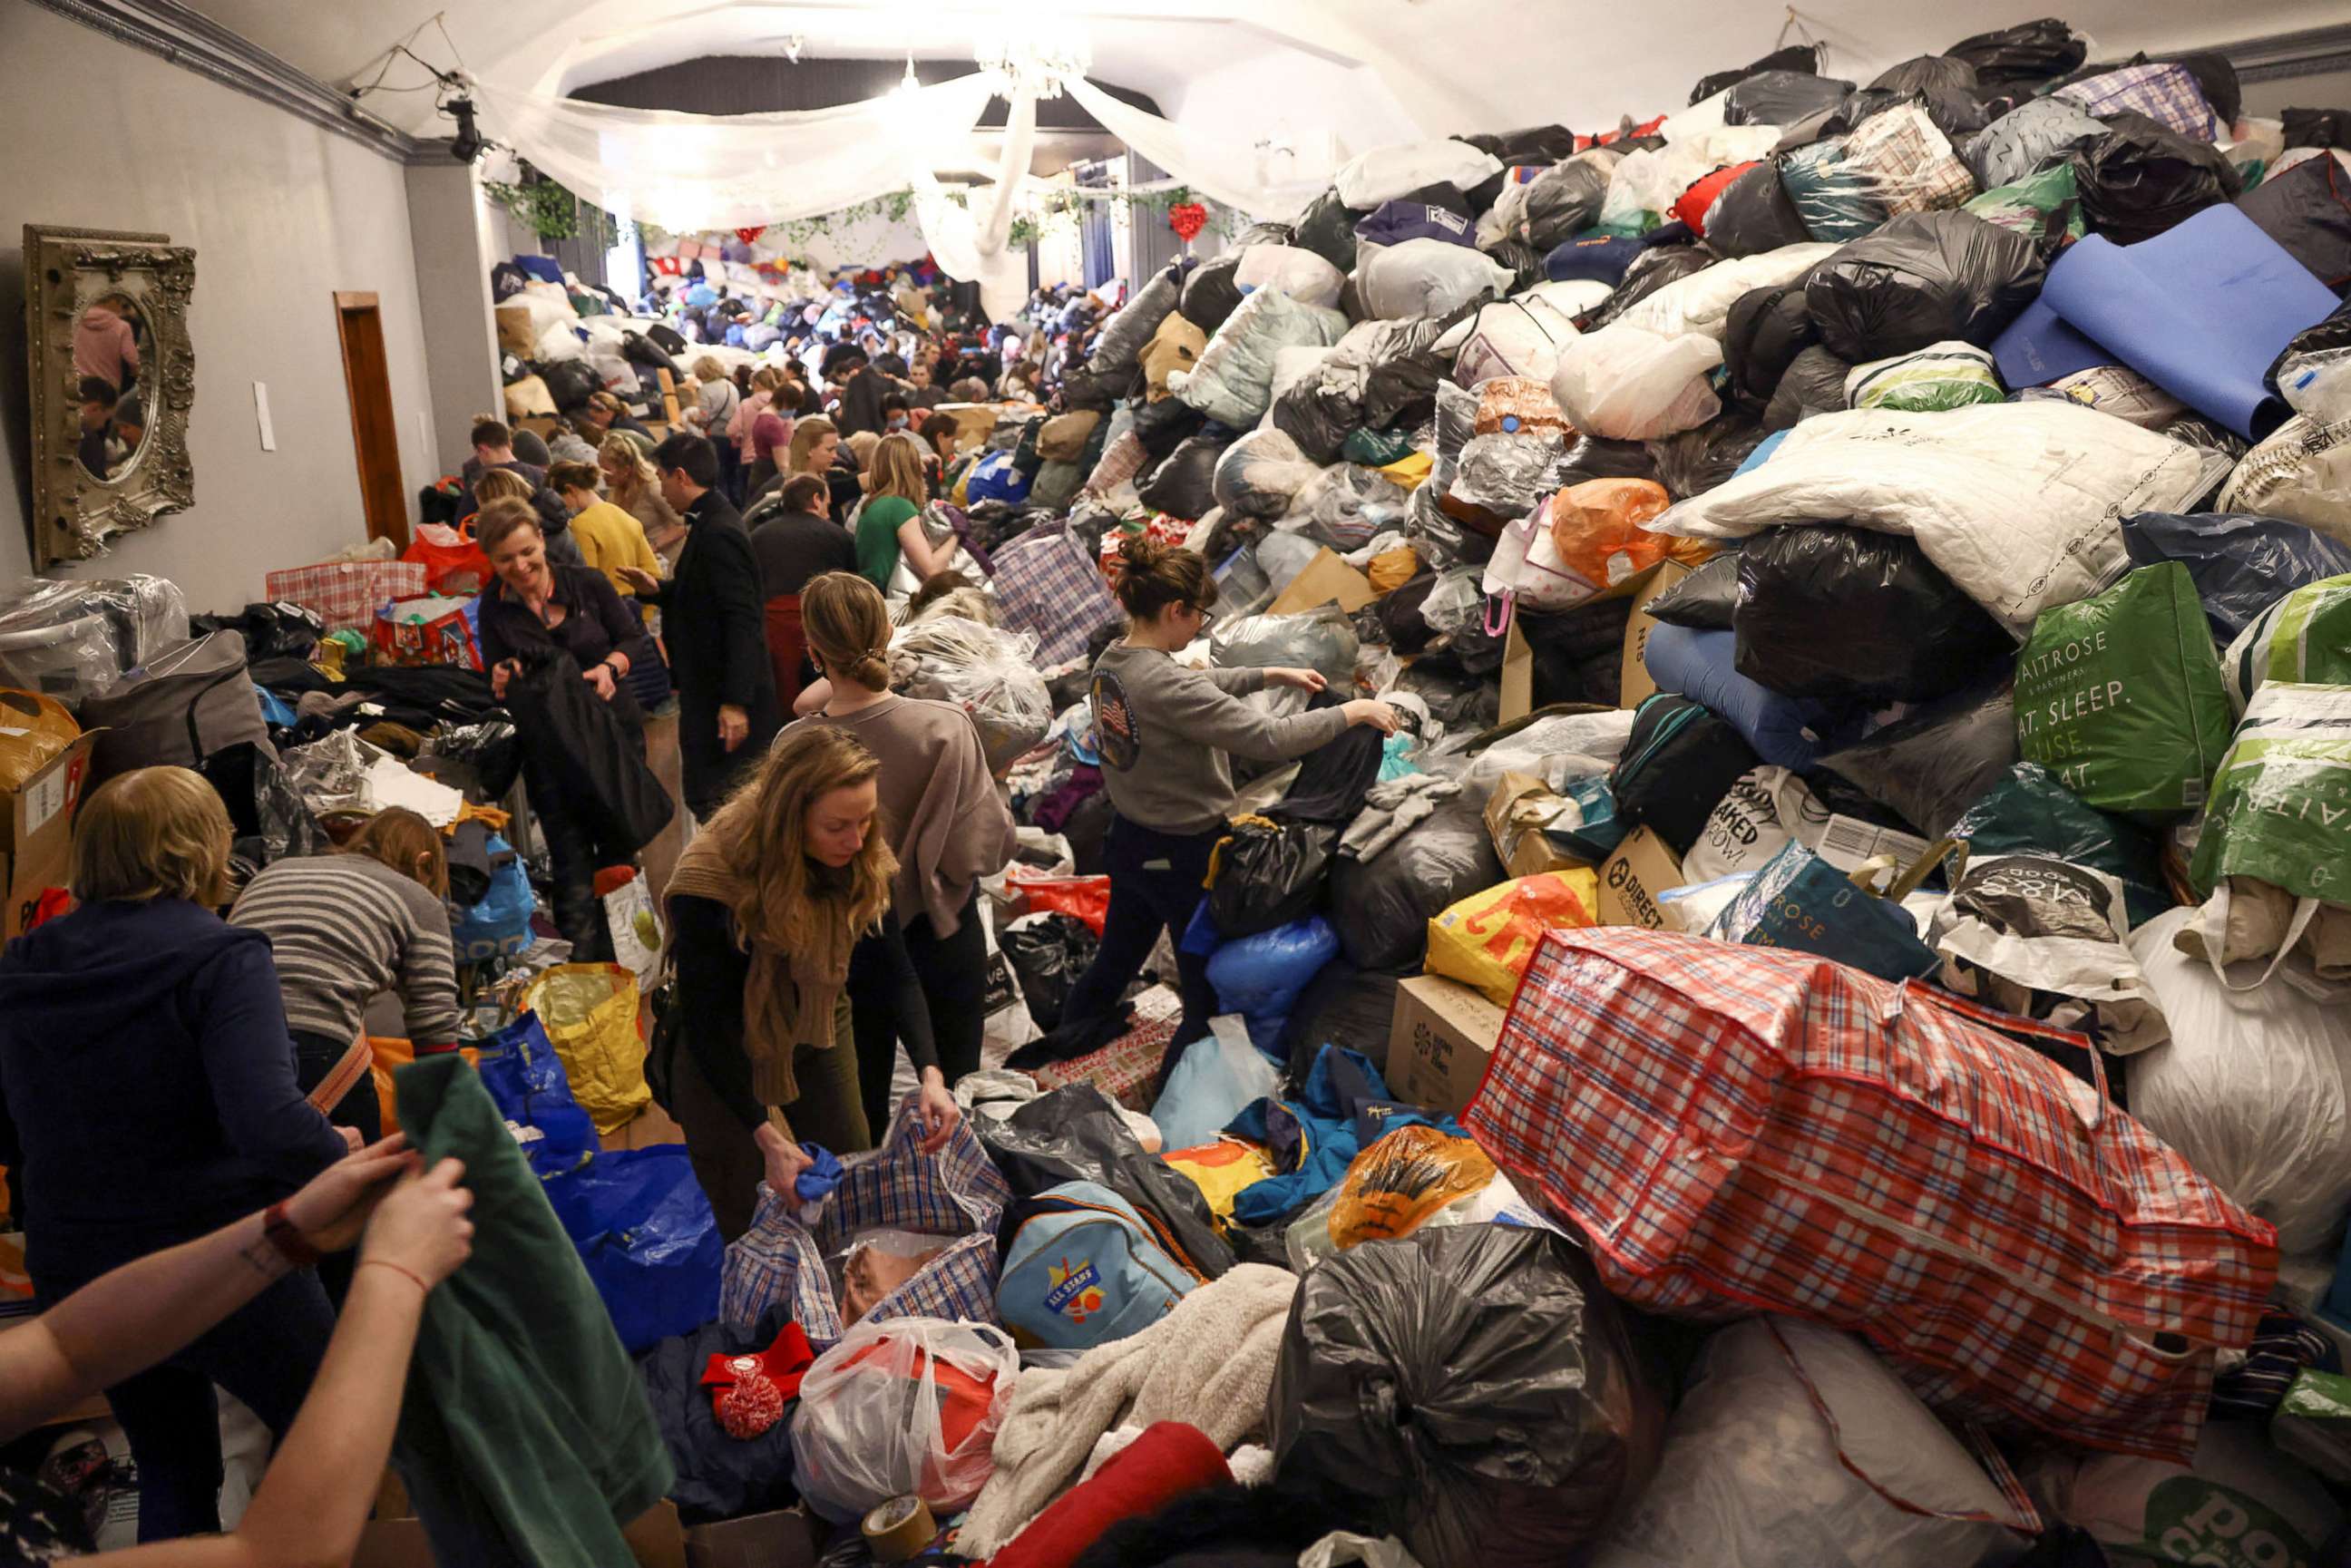 PHOTO: Volunteers sort through donations at the White Eagle Club, ahead of their convoy leaving to deliver aid to those fleeing the Russian invasion in Ukraine, in London, Feb. 28, 2022.